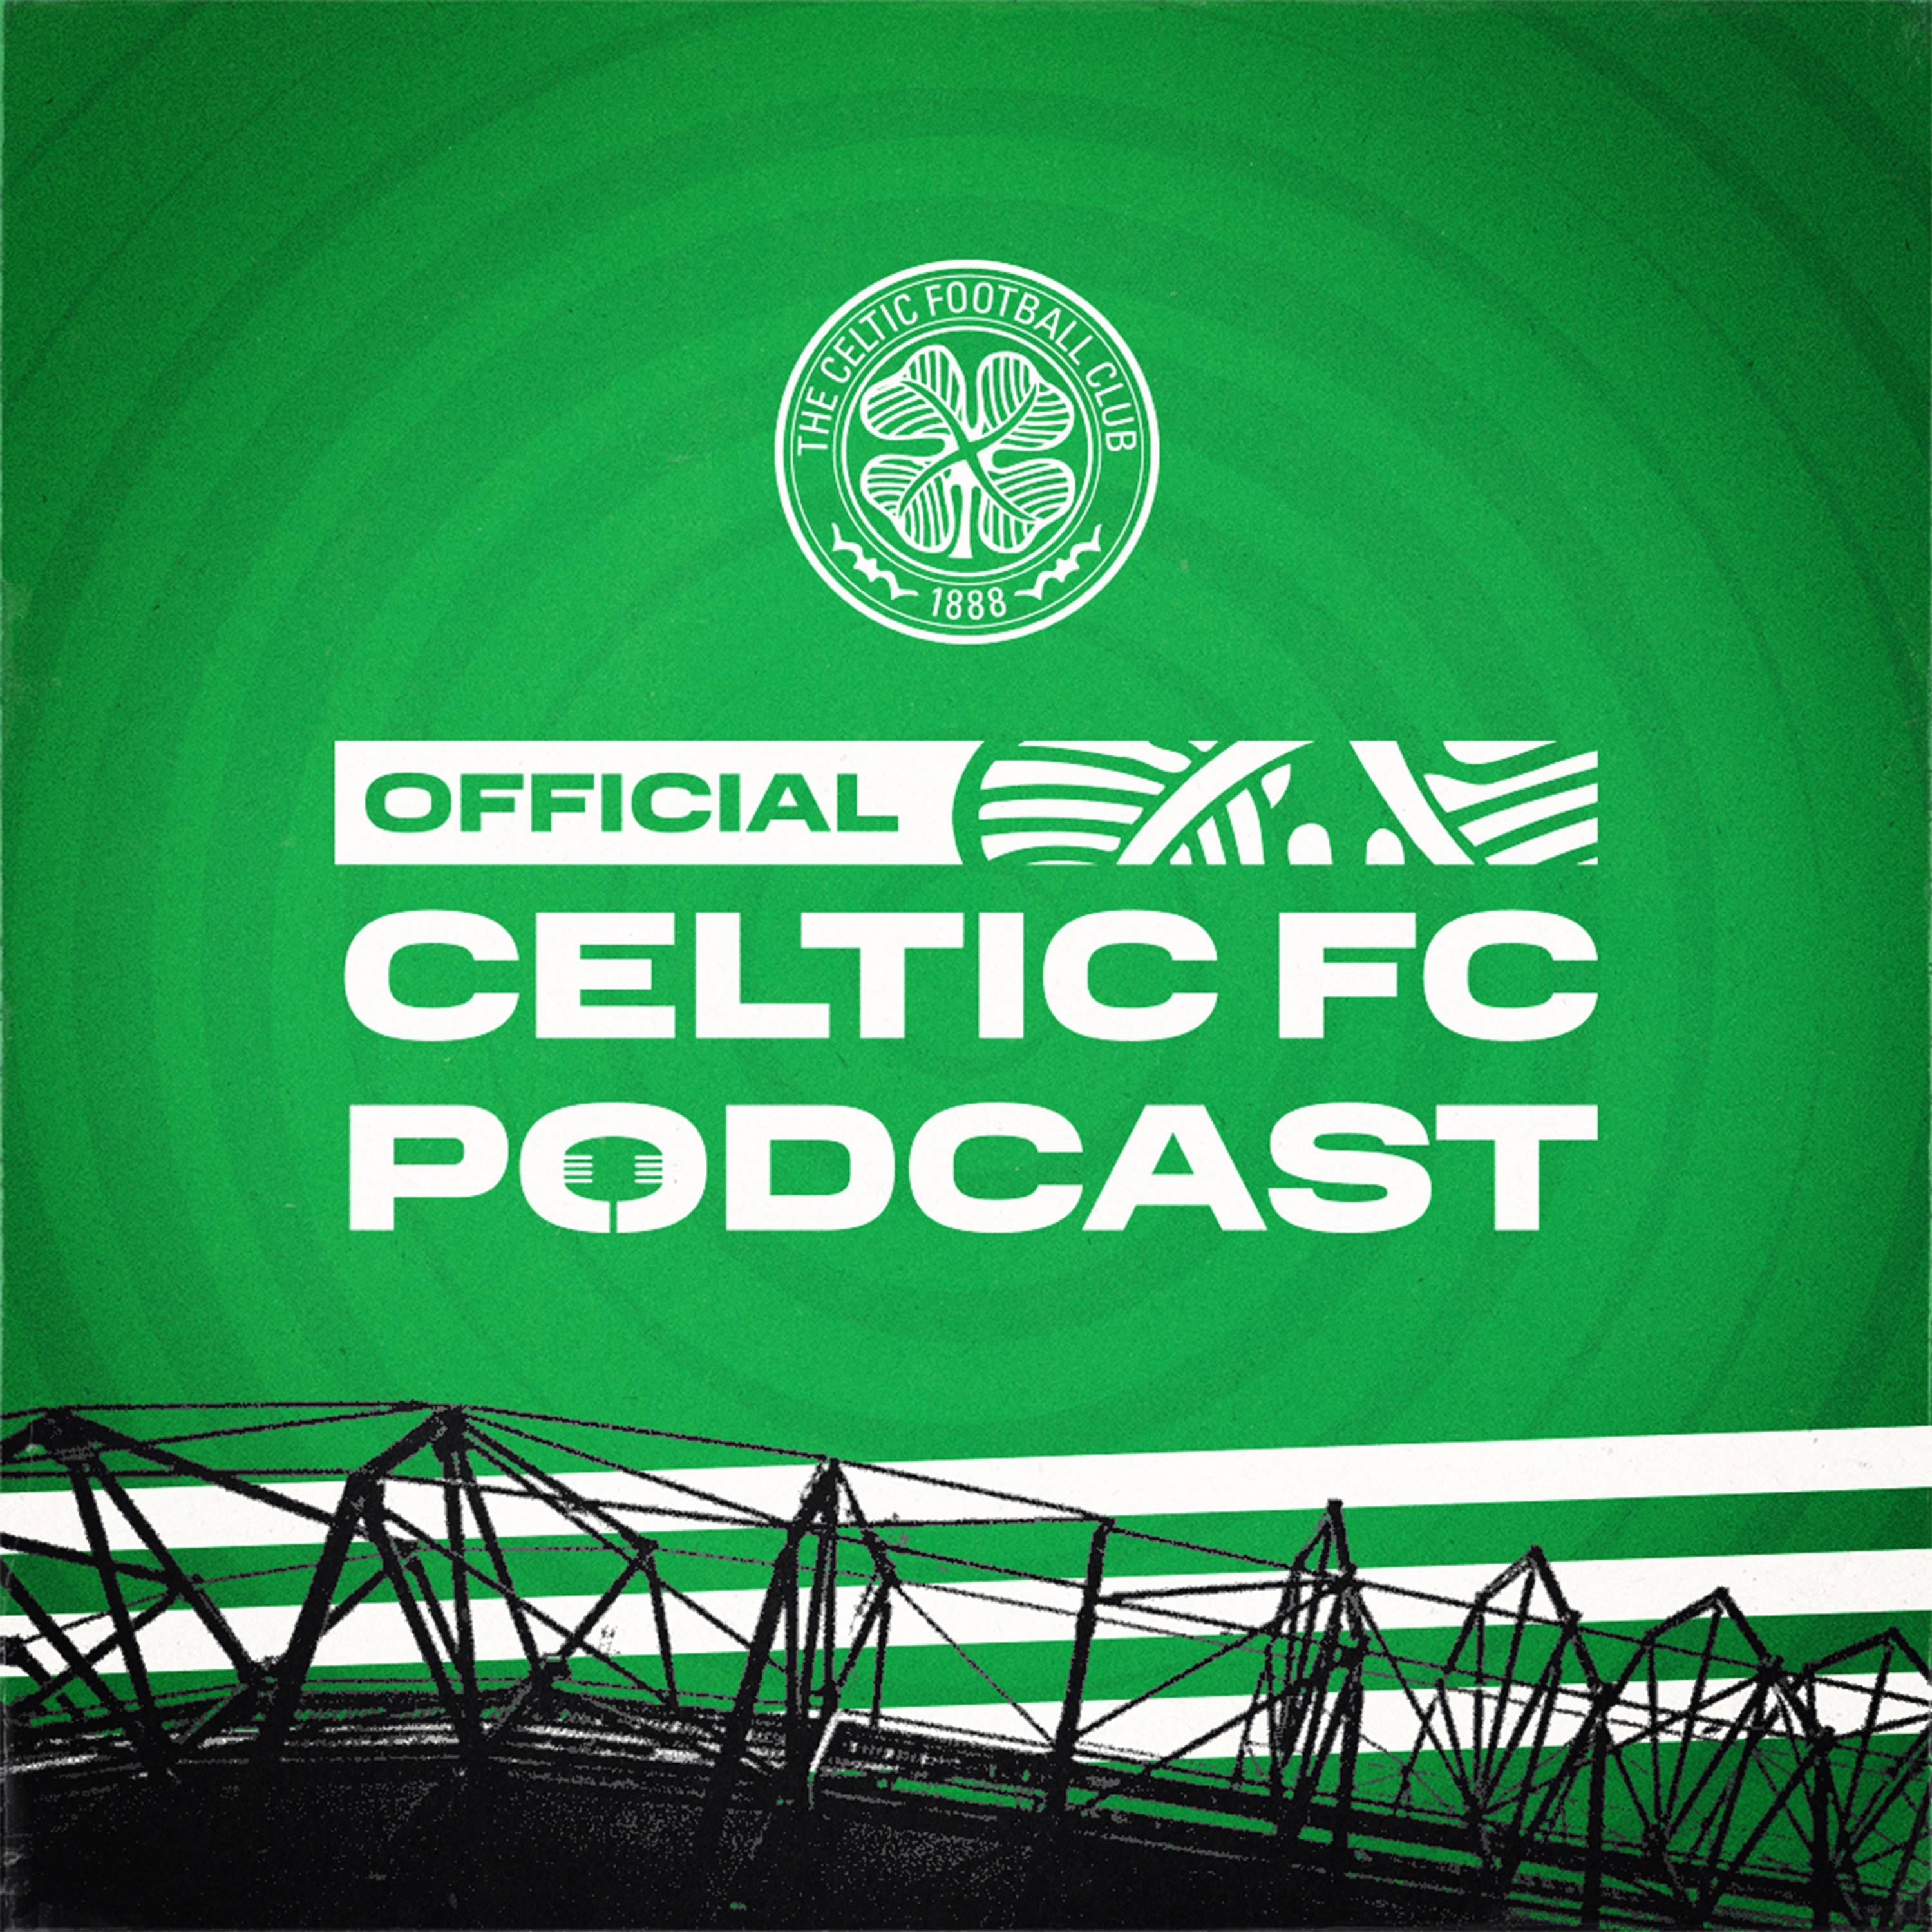 Special guest GREG TAYLOR’S hysterical chat on Alistair Johnston, his must-have cheat meal, Celtic’s huge festive period, Christmas, and more teammate stories! | Official Celtic FC Podcast